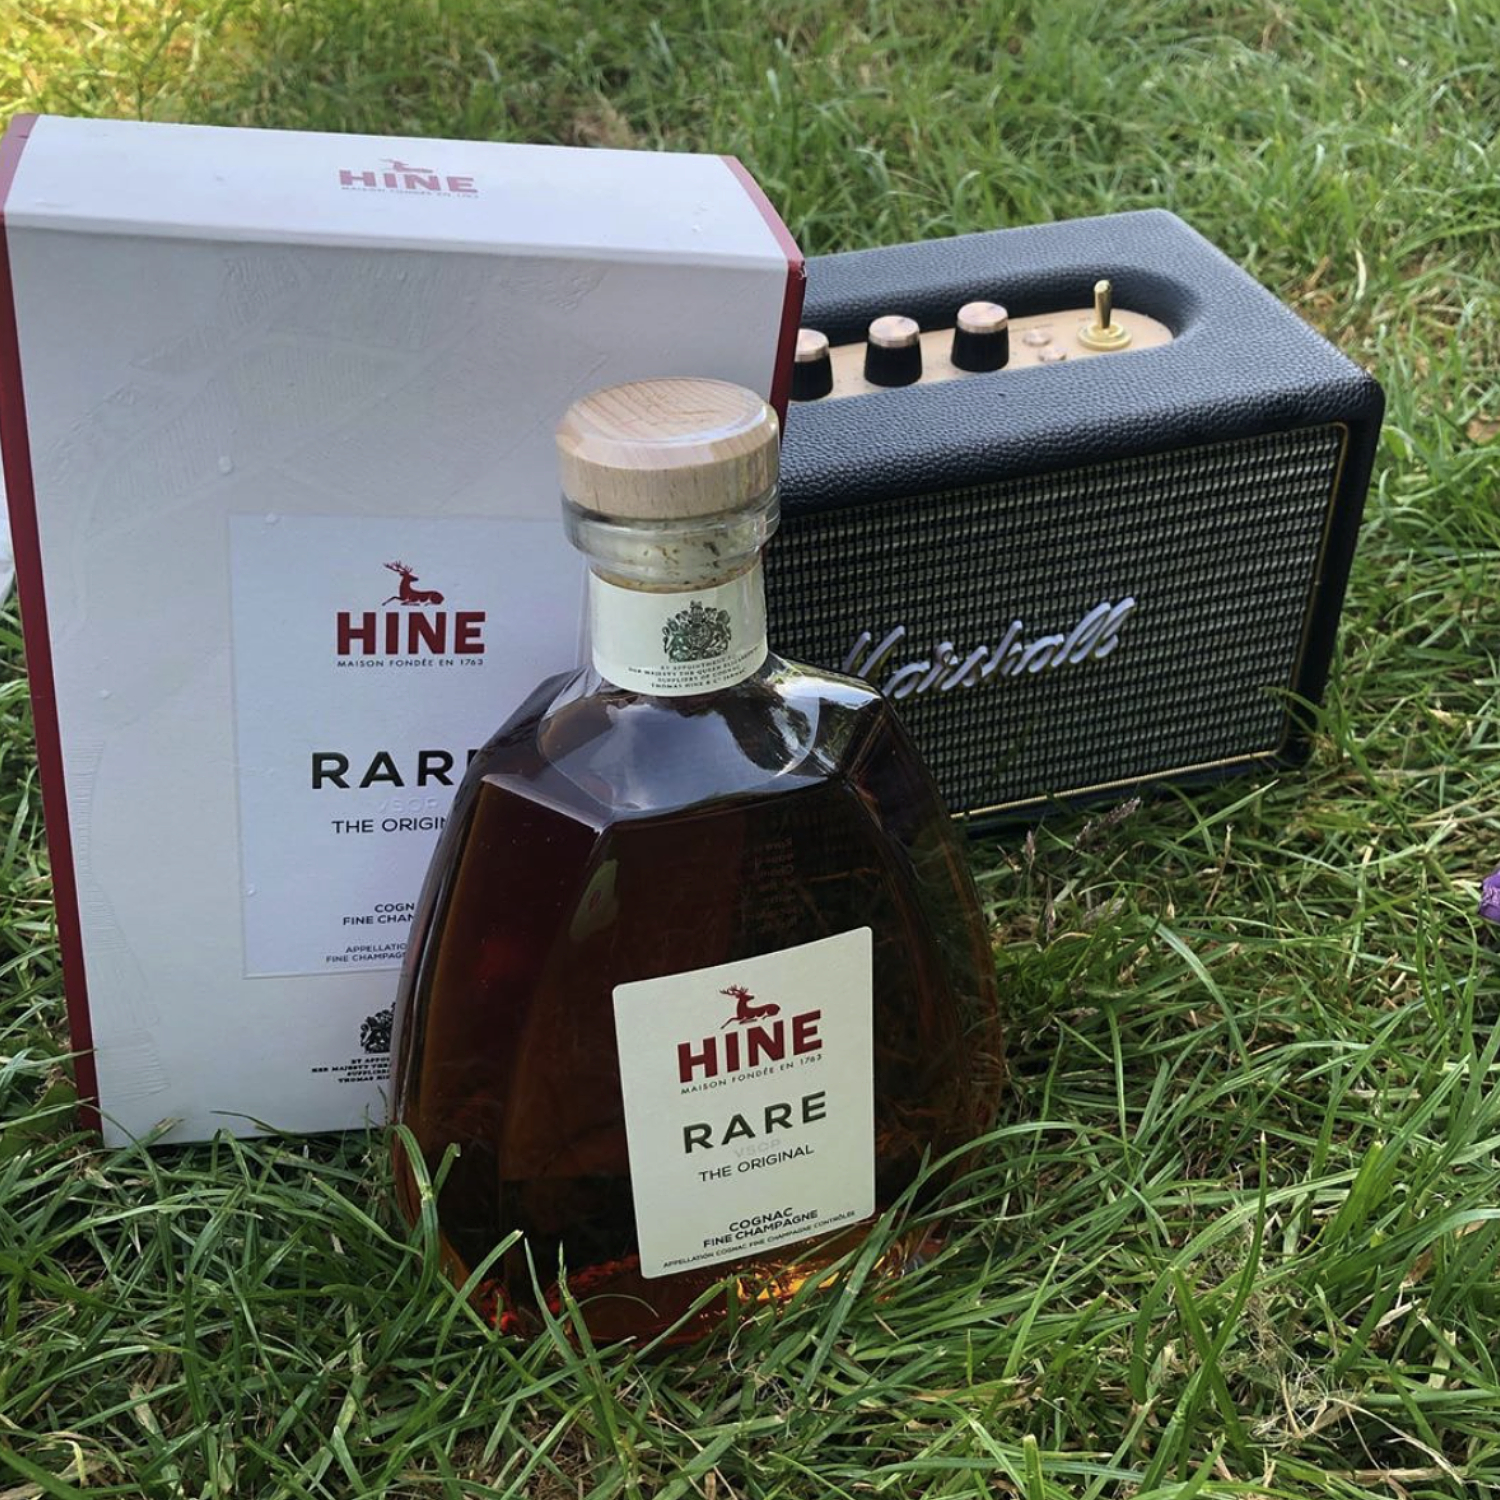 A bottle of Hine Rare next to a Marshall speaker